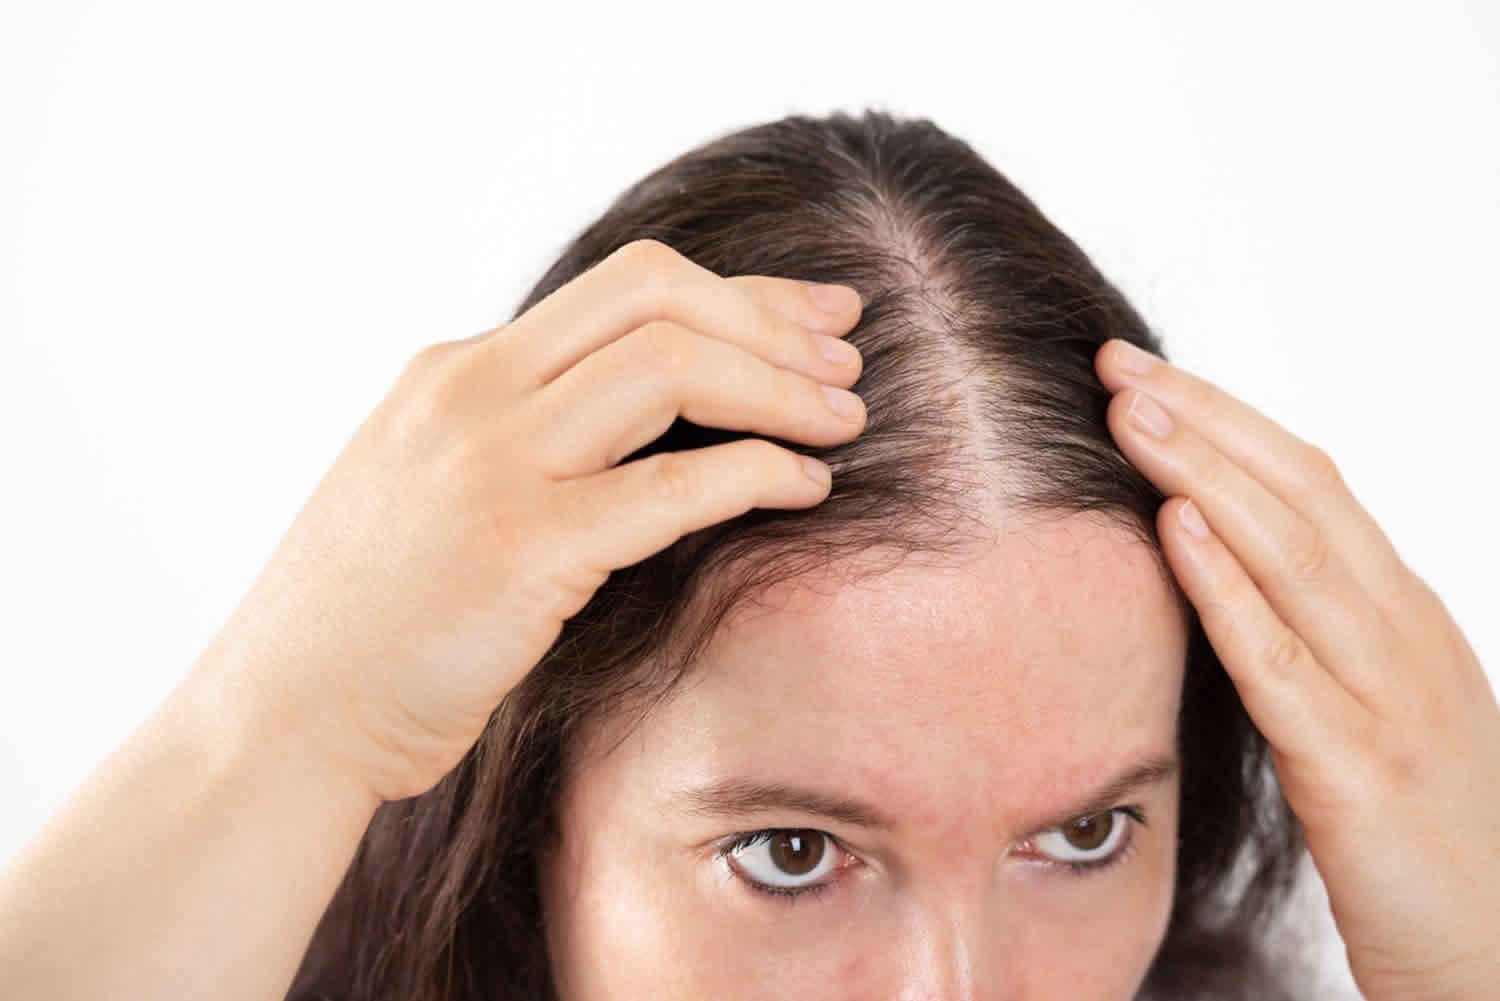 Thinning hair & female hair loss causes, prevention, diagnosis & treatment